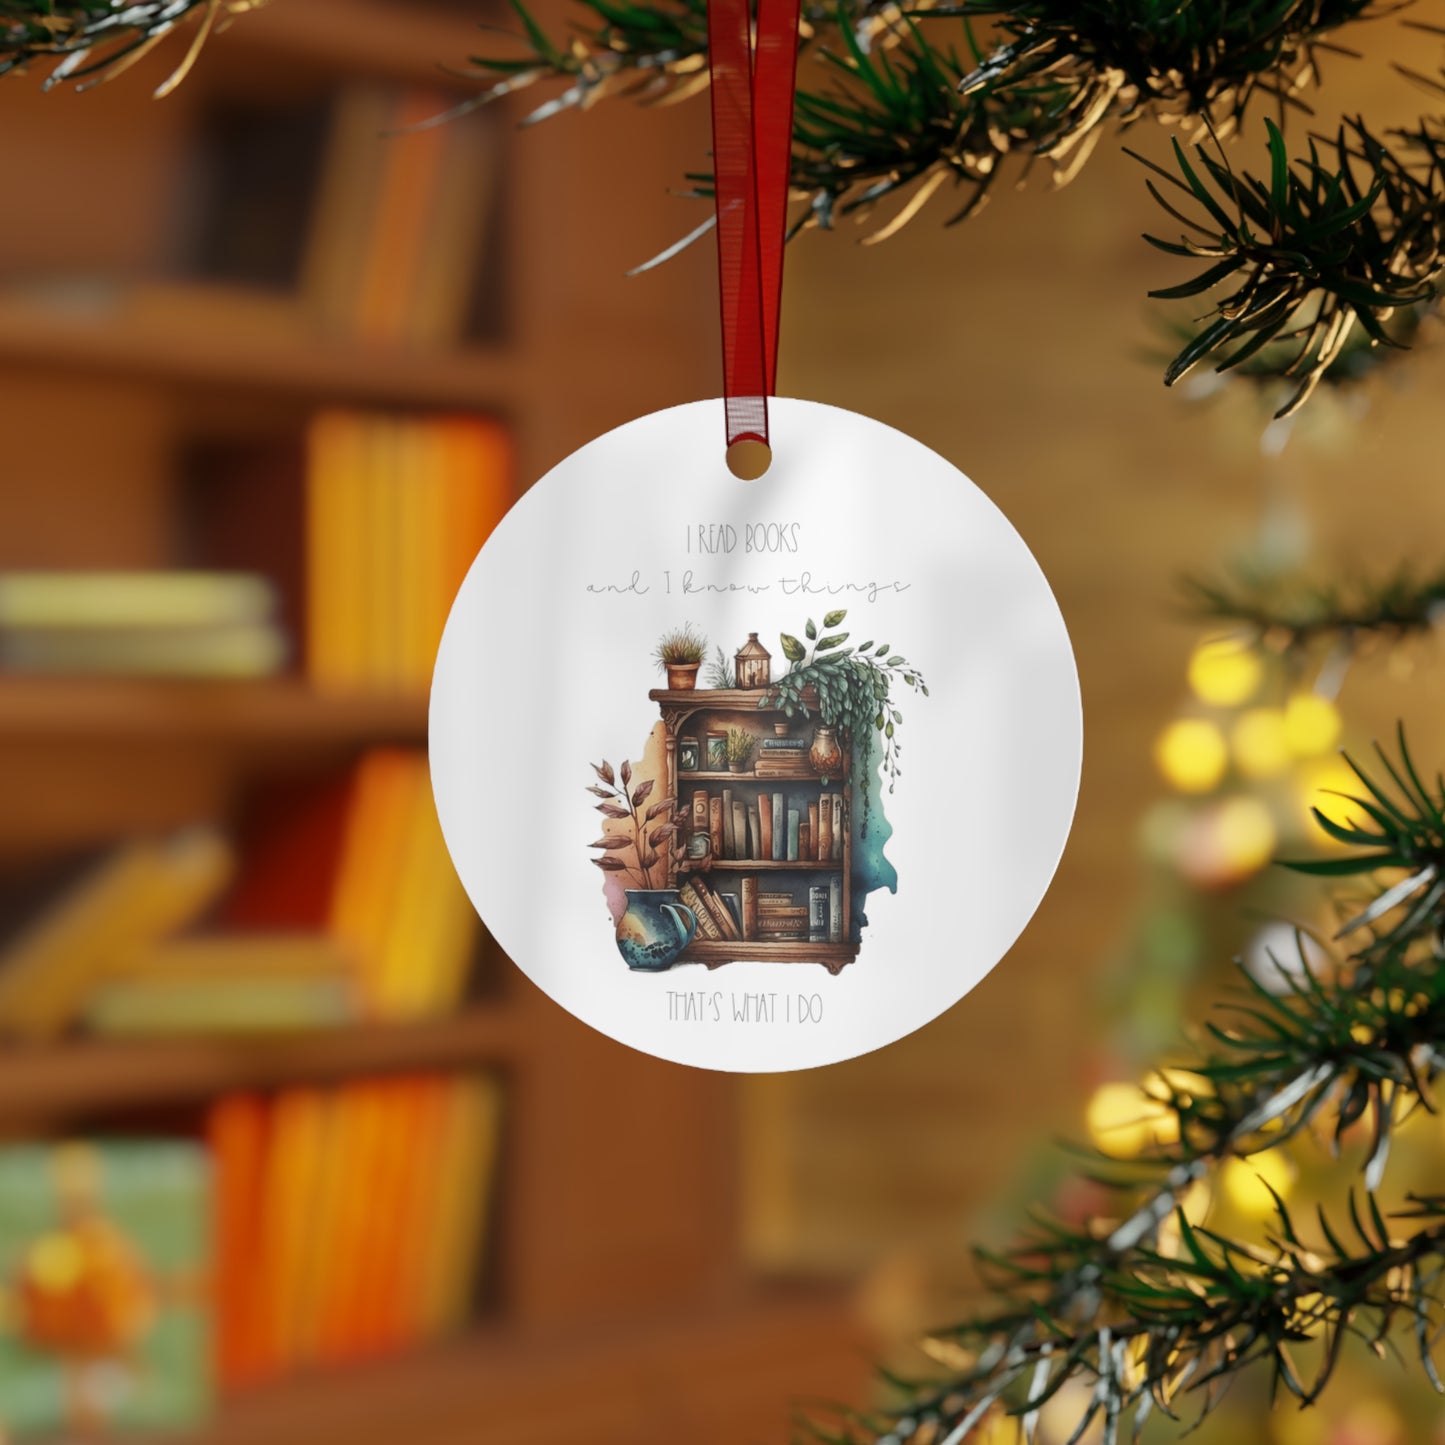 Round Metal Ornament “I read books and I know things. That’s what I do.”